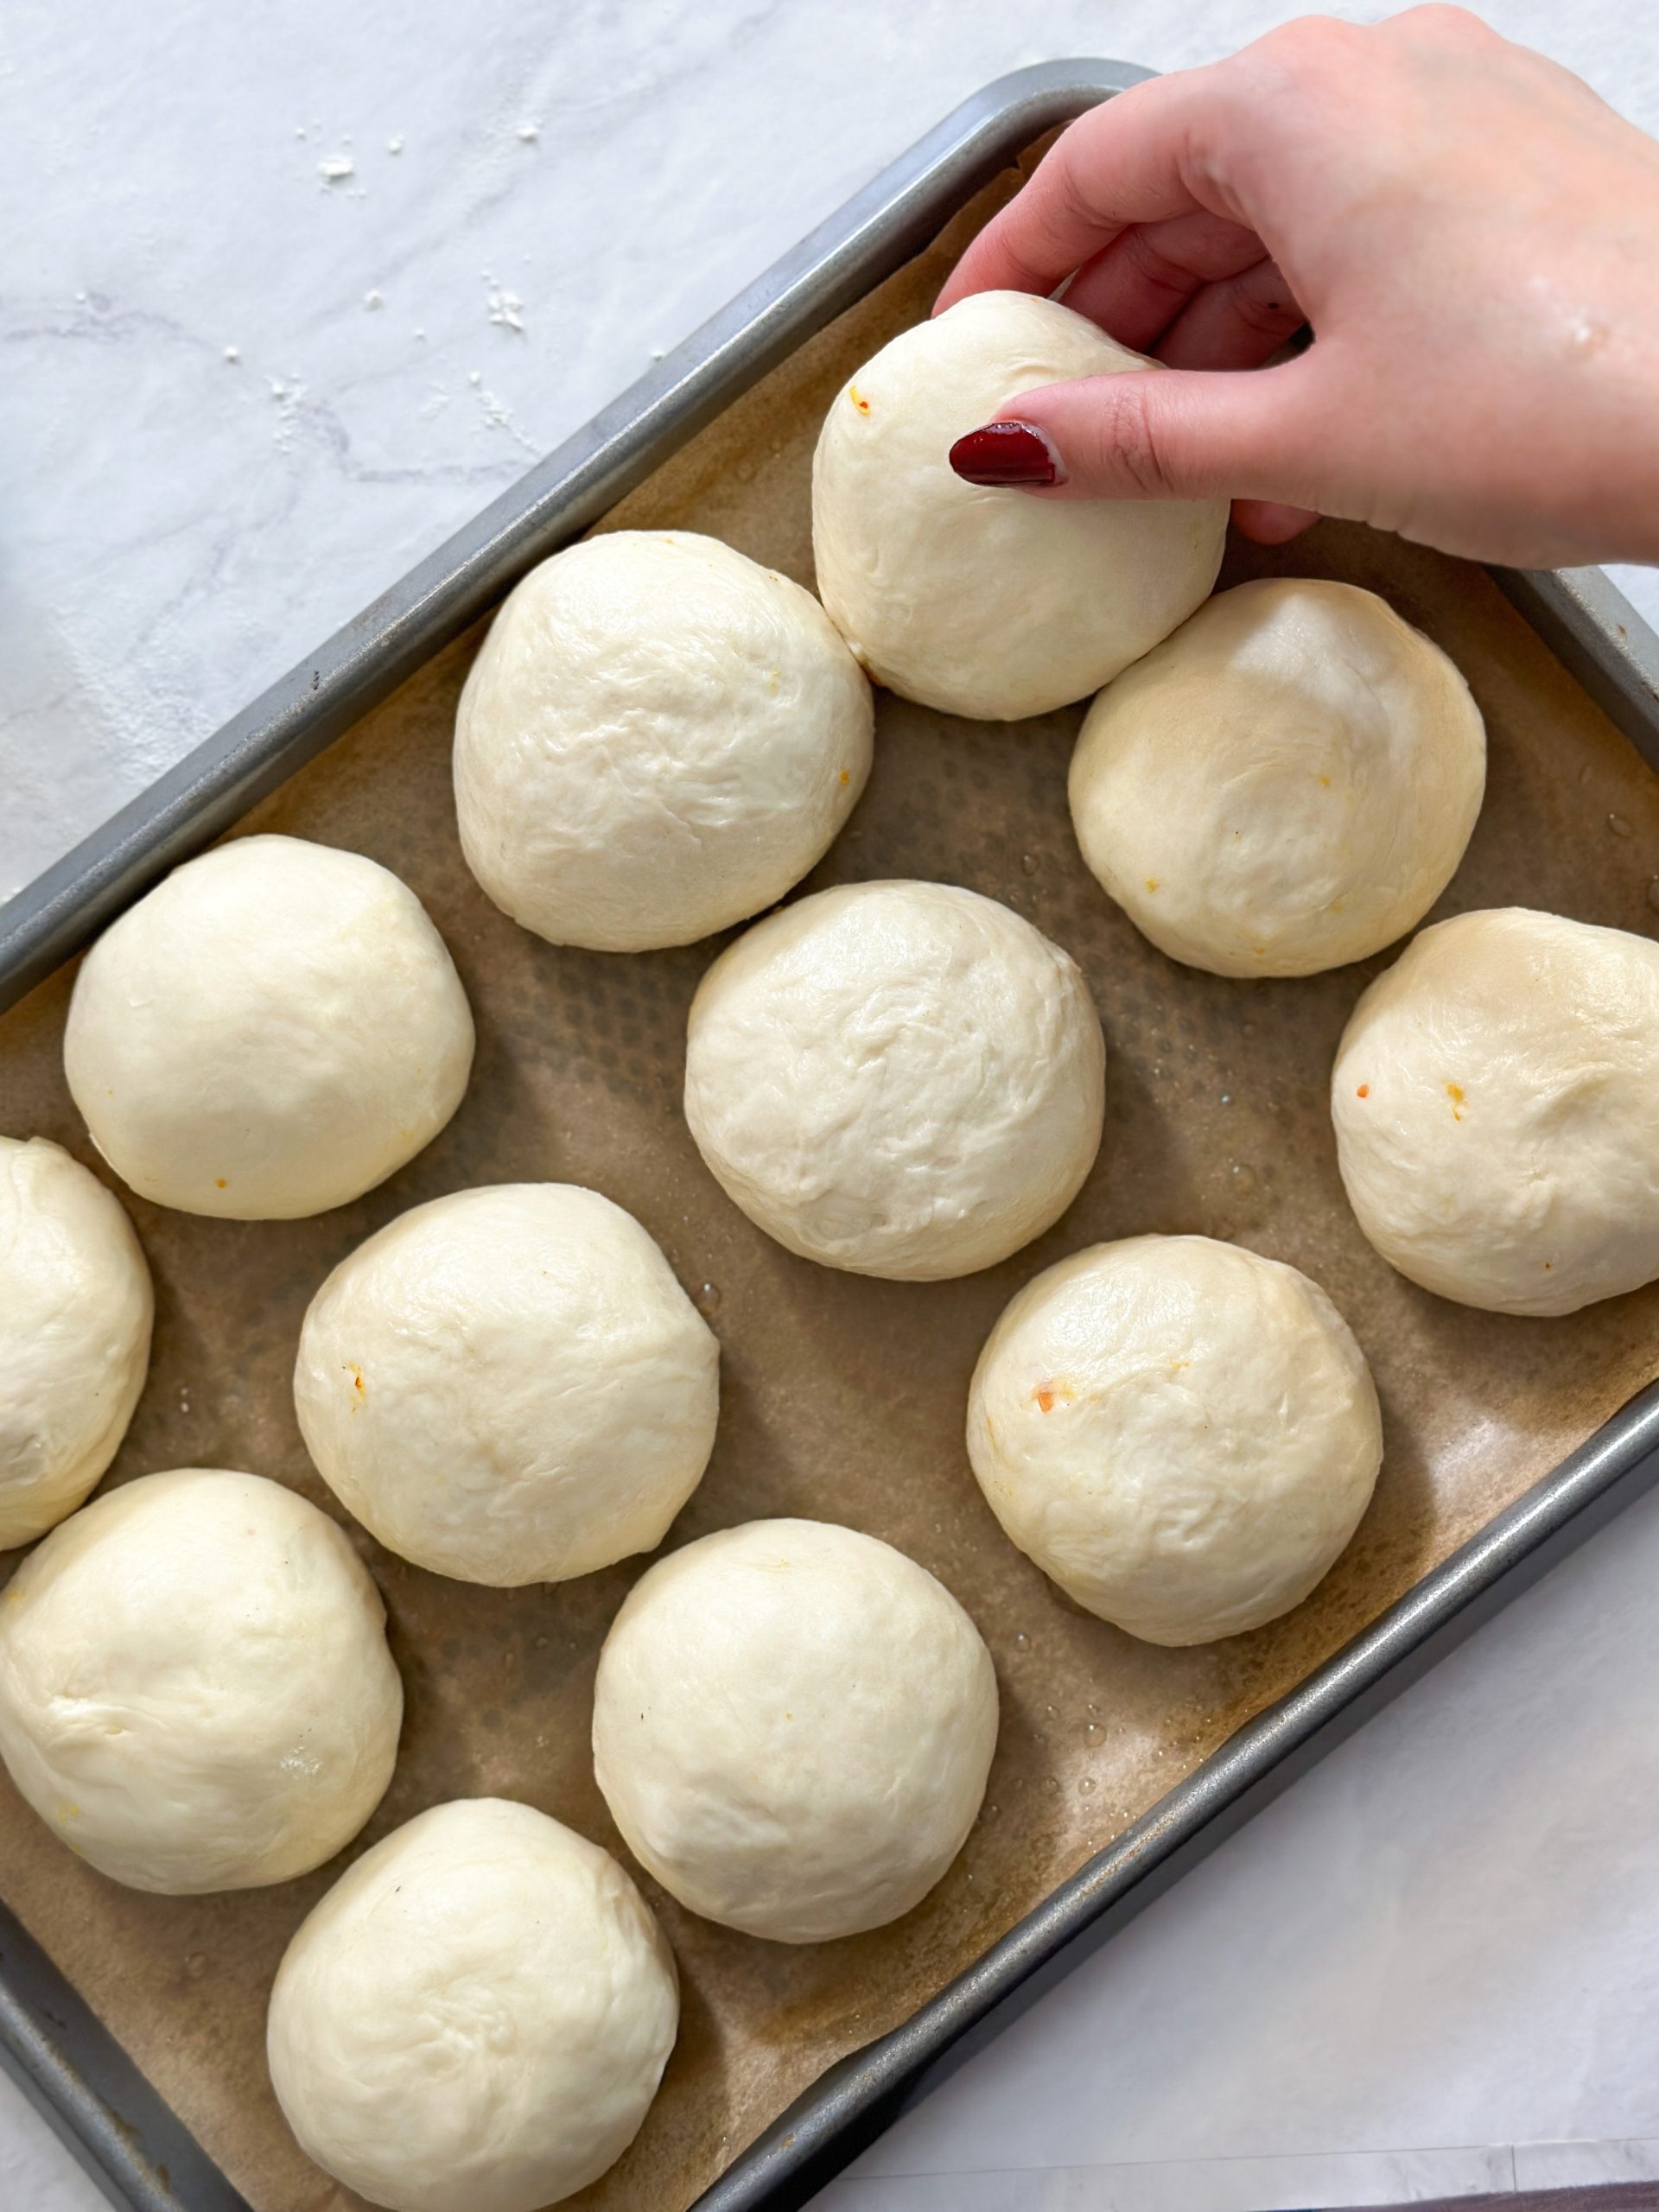 hand is placing a naan bun in a tray with 11 other naan buns, to have 12 overall